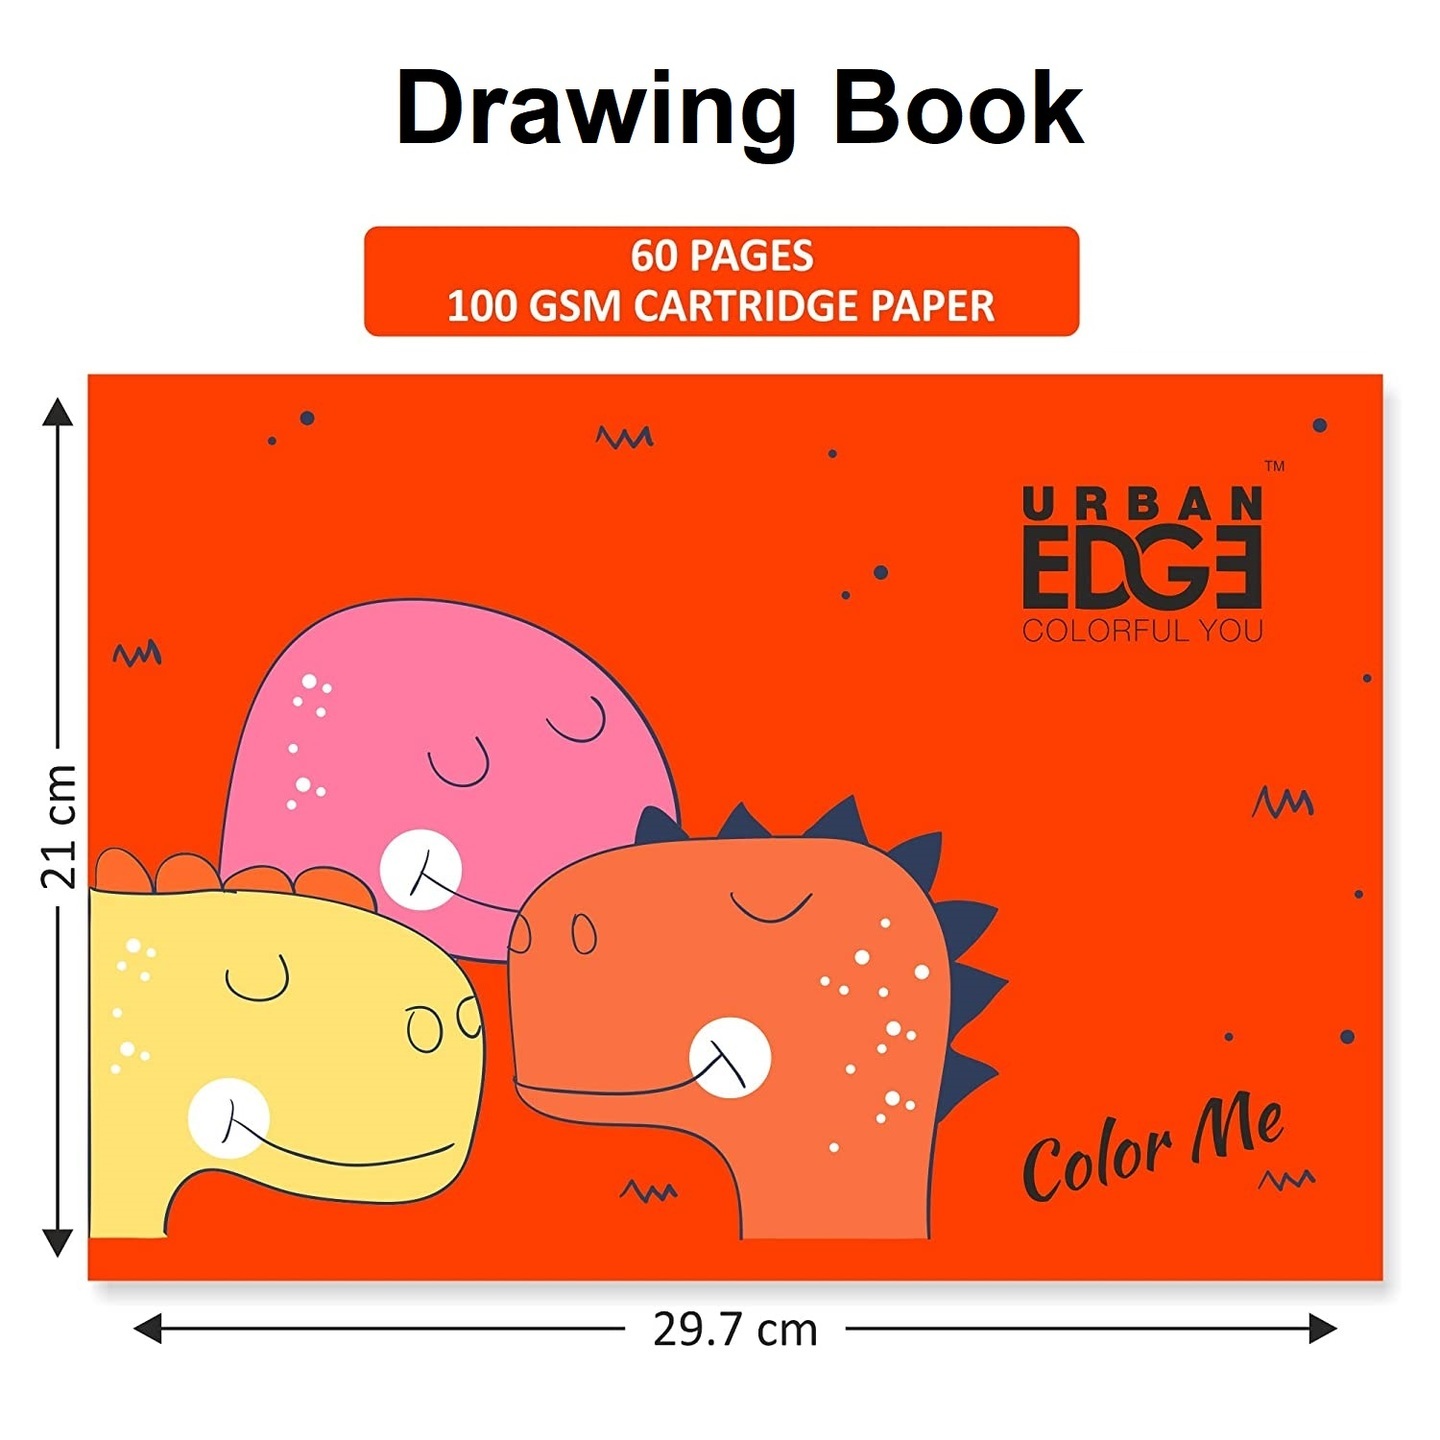 Urban Edge Drawing Book 60 pages